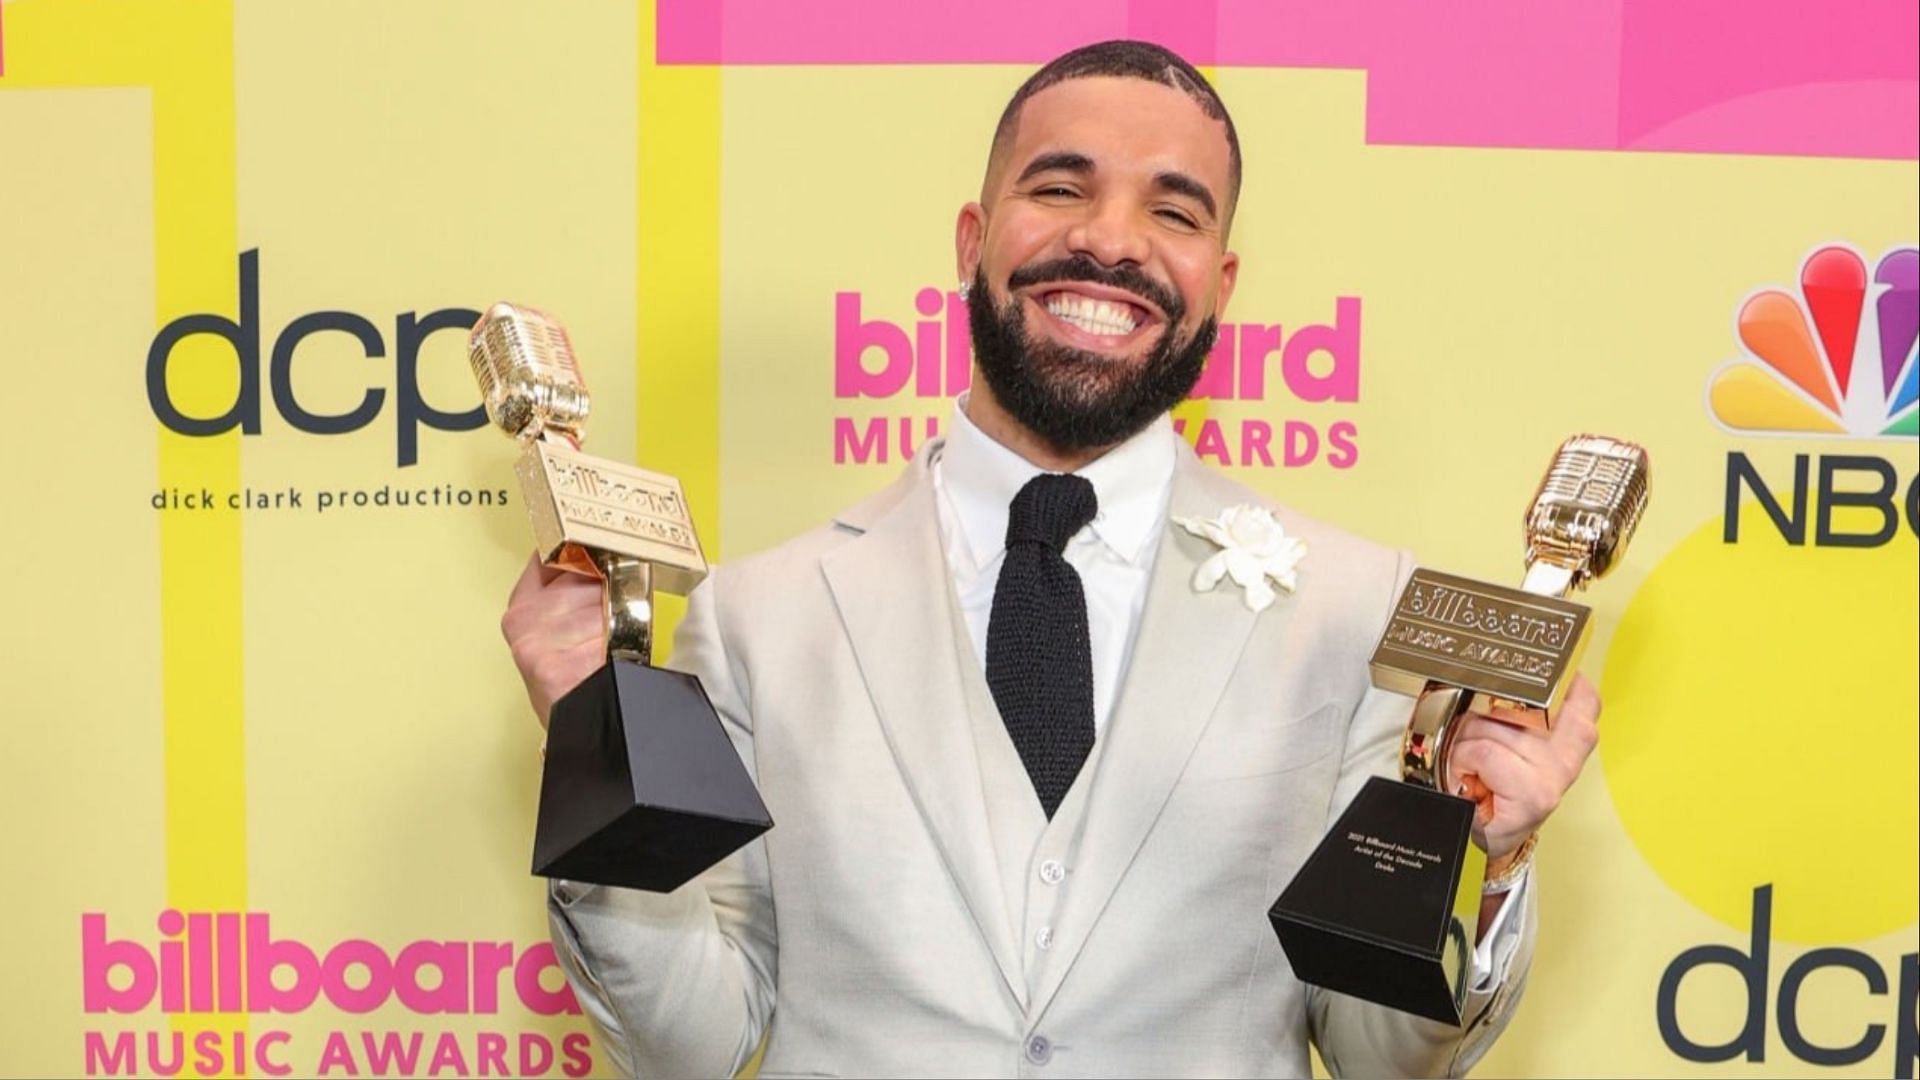 Drake poses backstage during the 2021 Billboard Music Awards held at the Microsoft Theatre on May 23, 2021, in Los Angeles, California. (Photo via Todd Williamson/Getty Images)